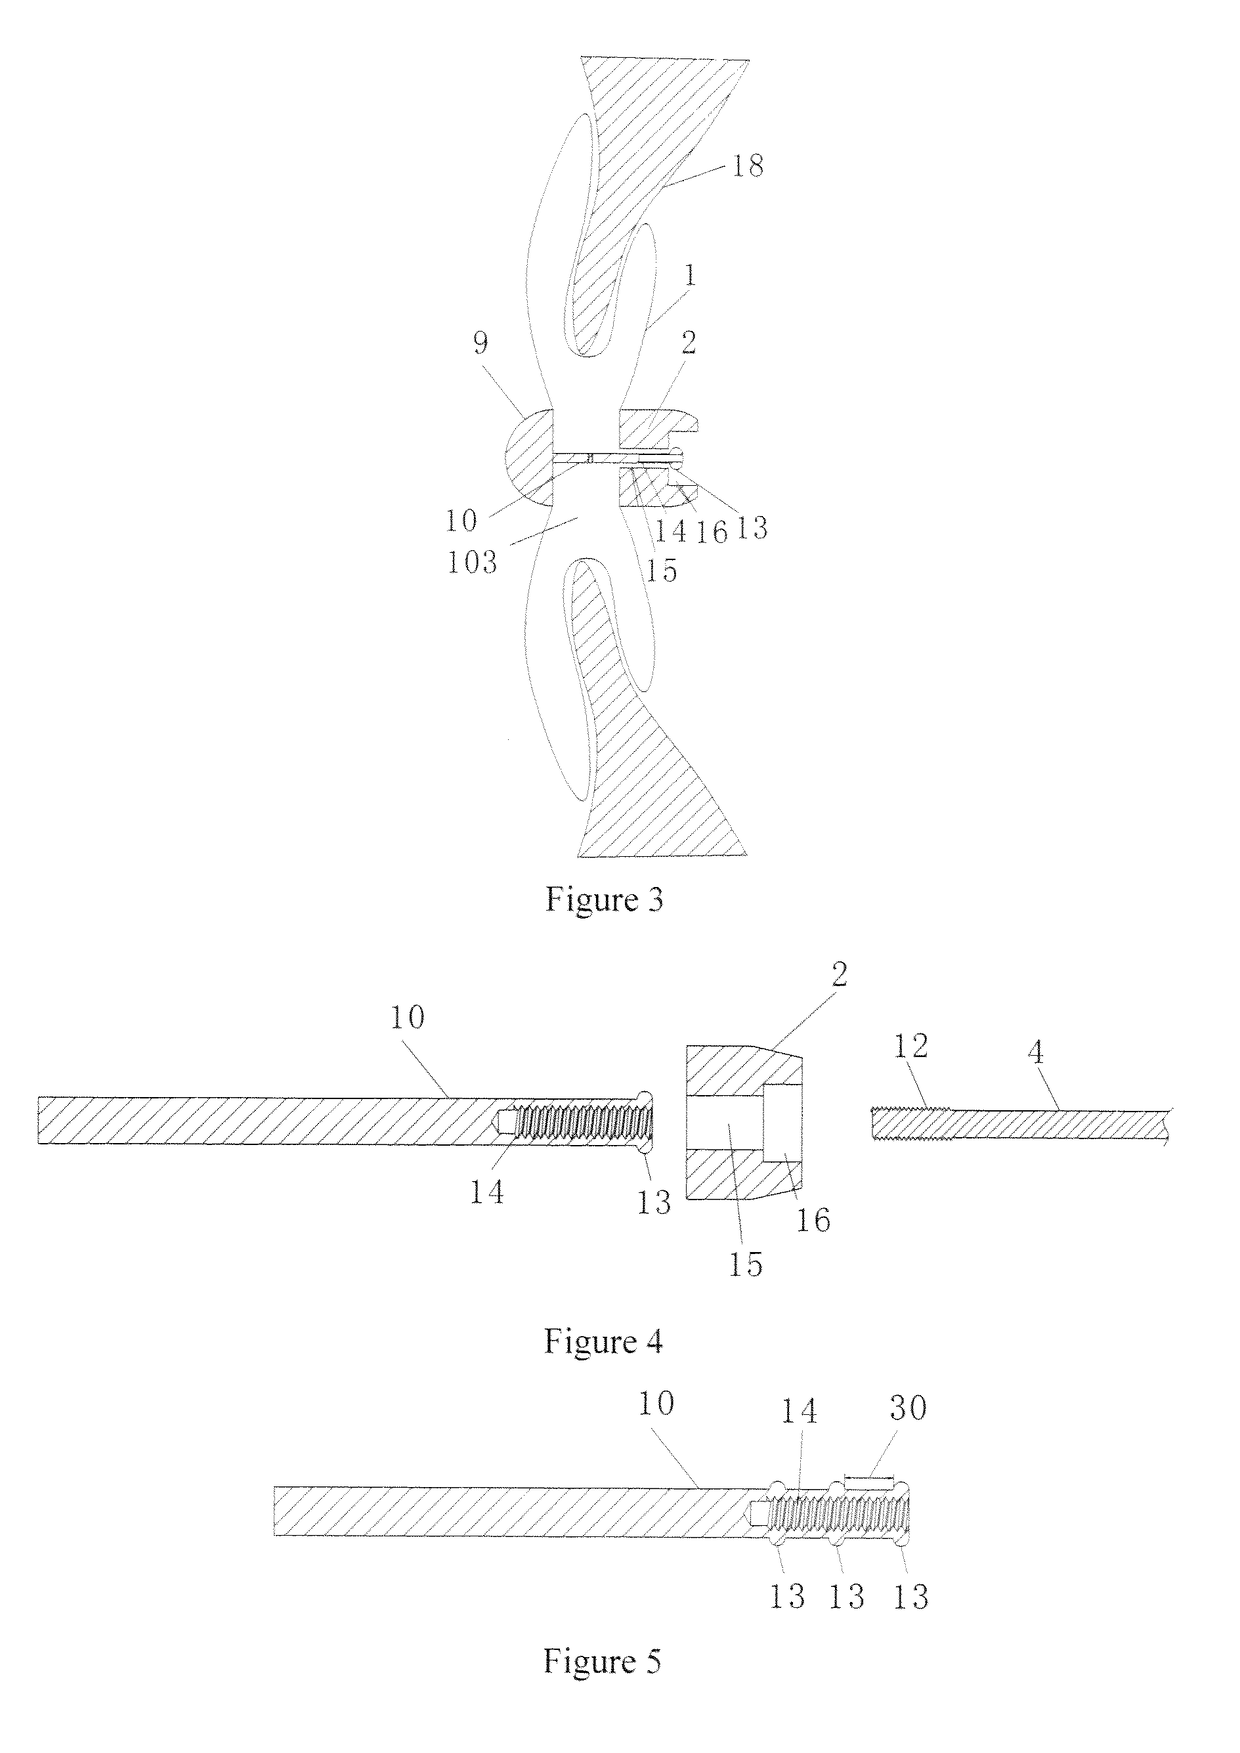 Occluder and Occlusion Device